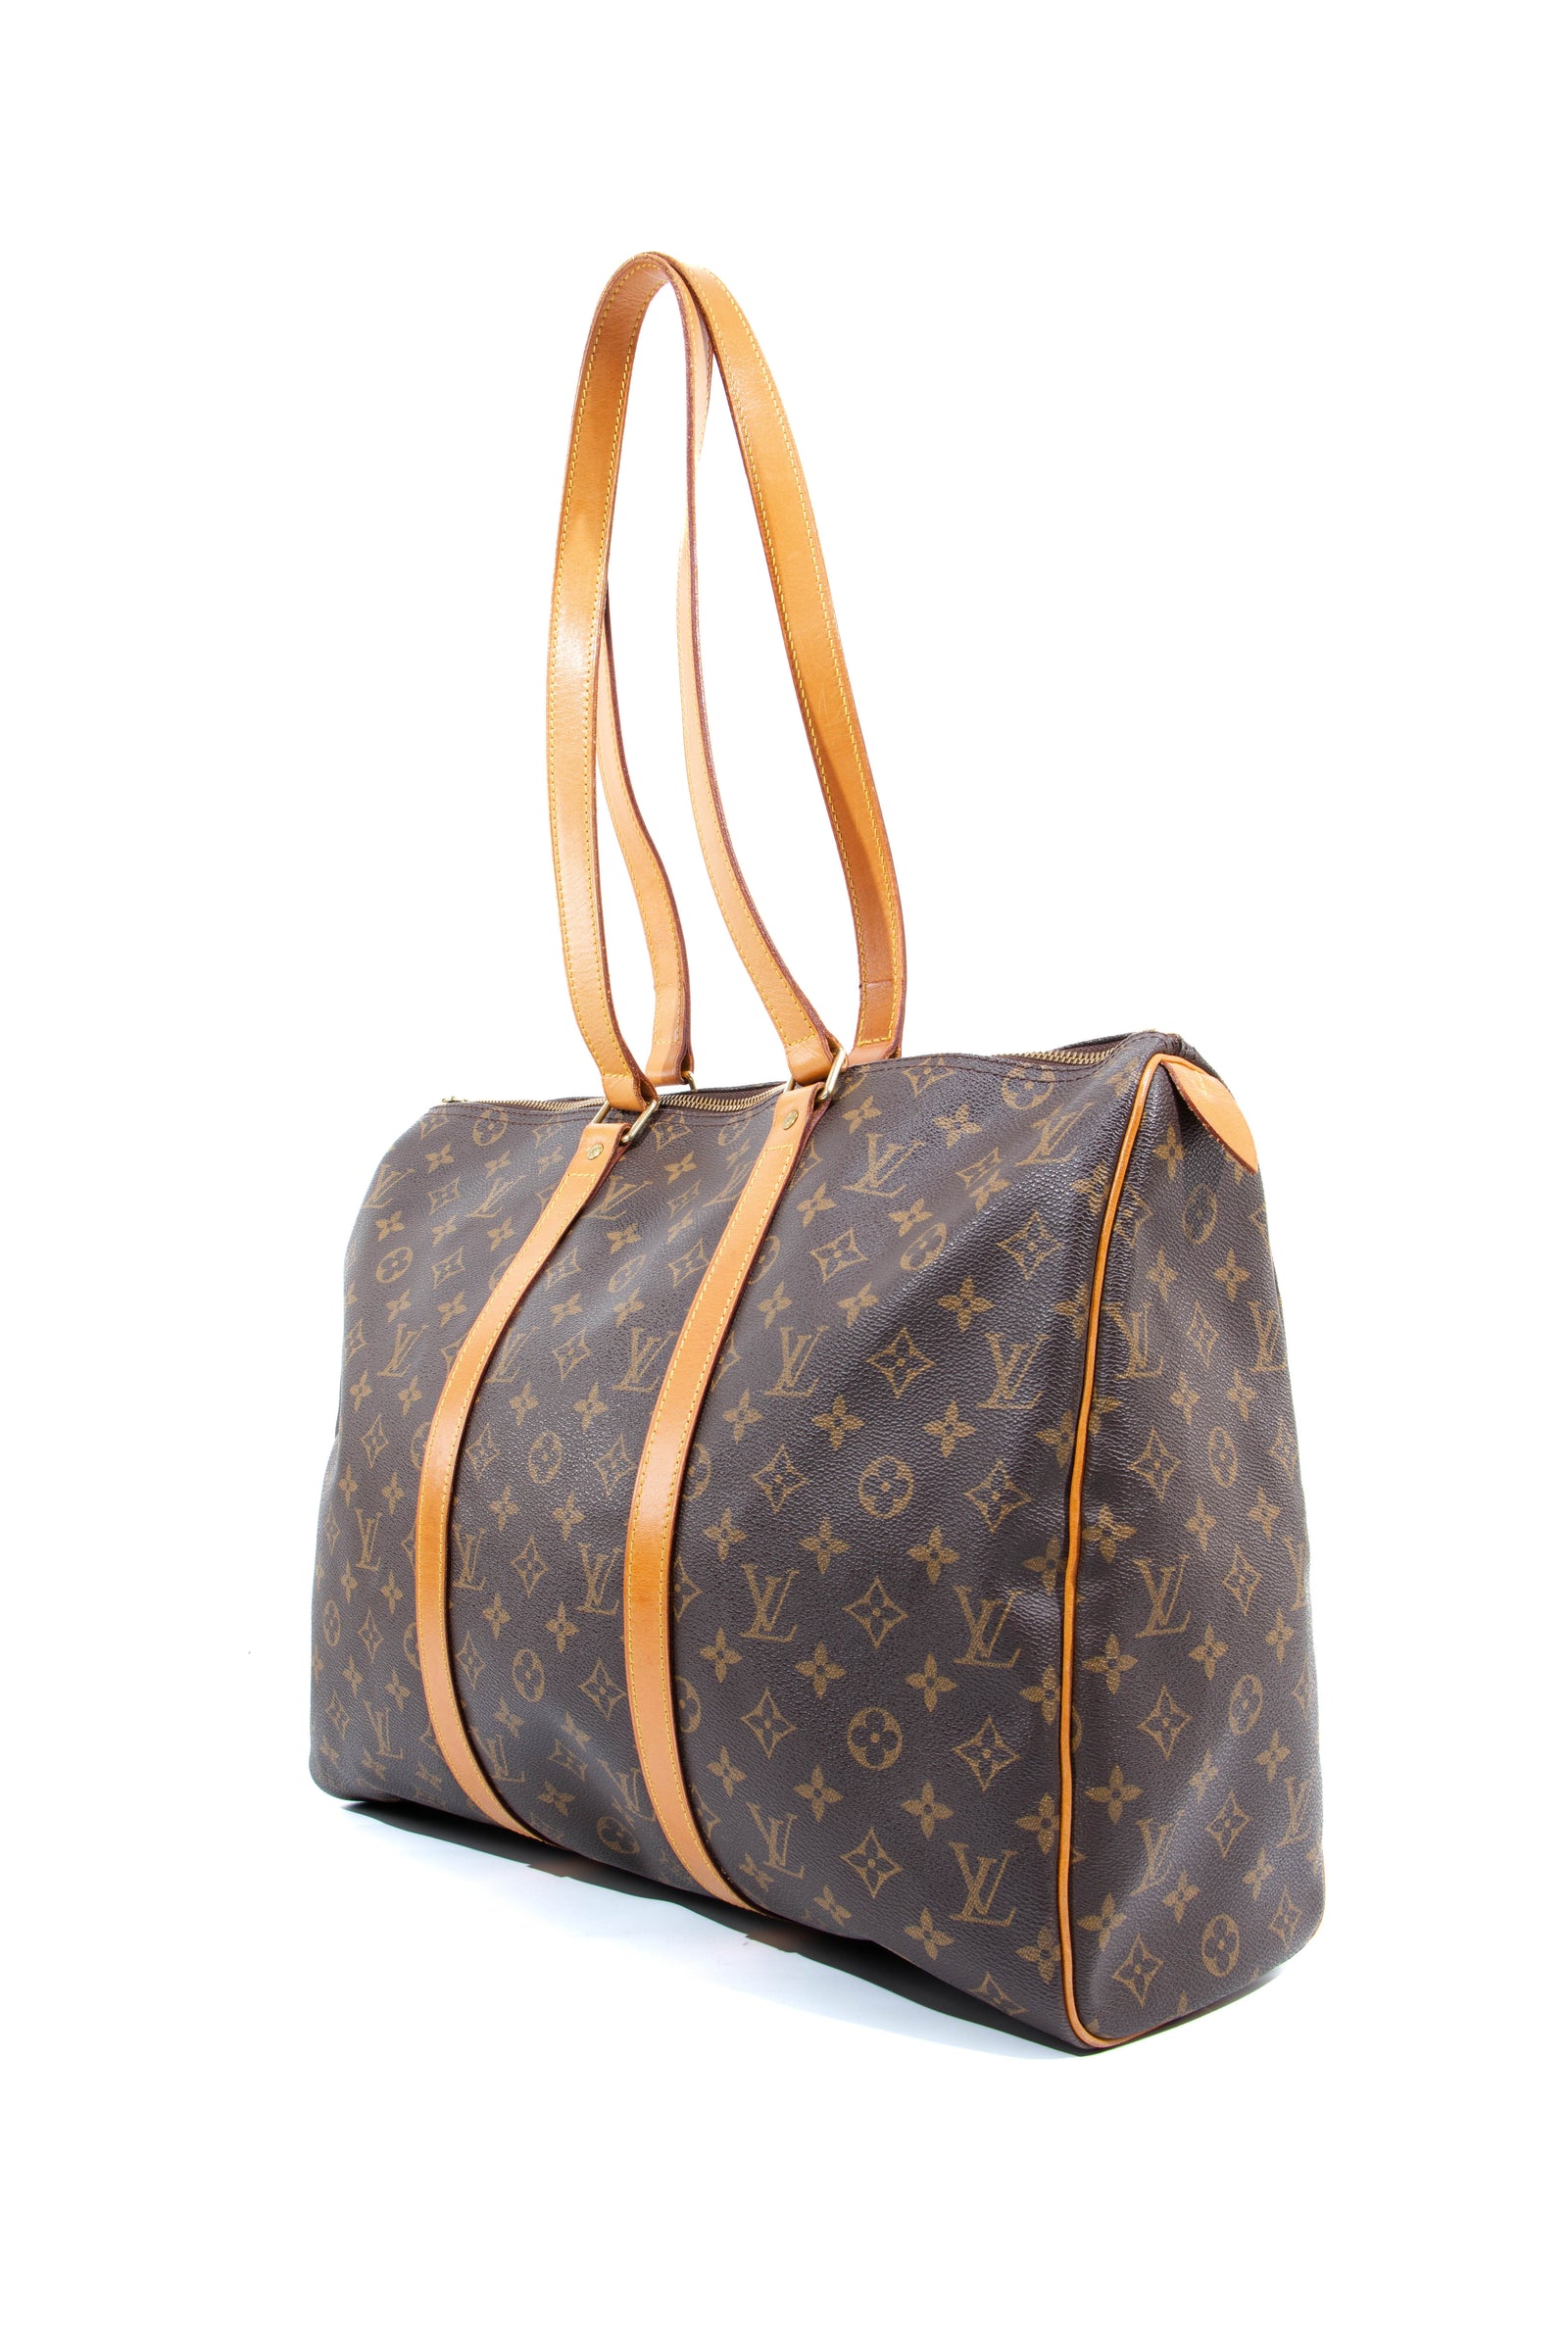 Louis Vuitton Sells $2,790 Bag with Very Large Holes - Racked